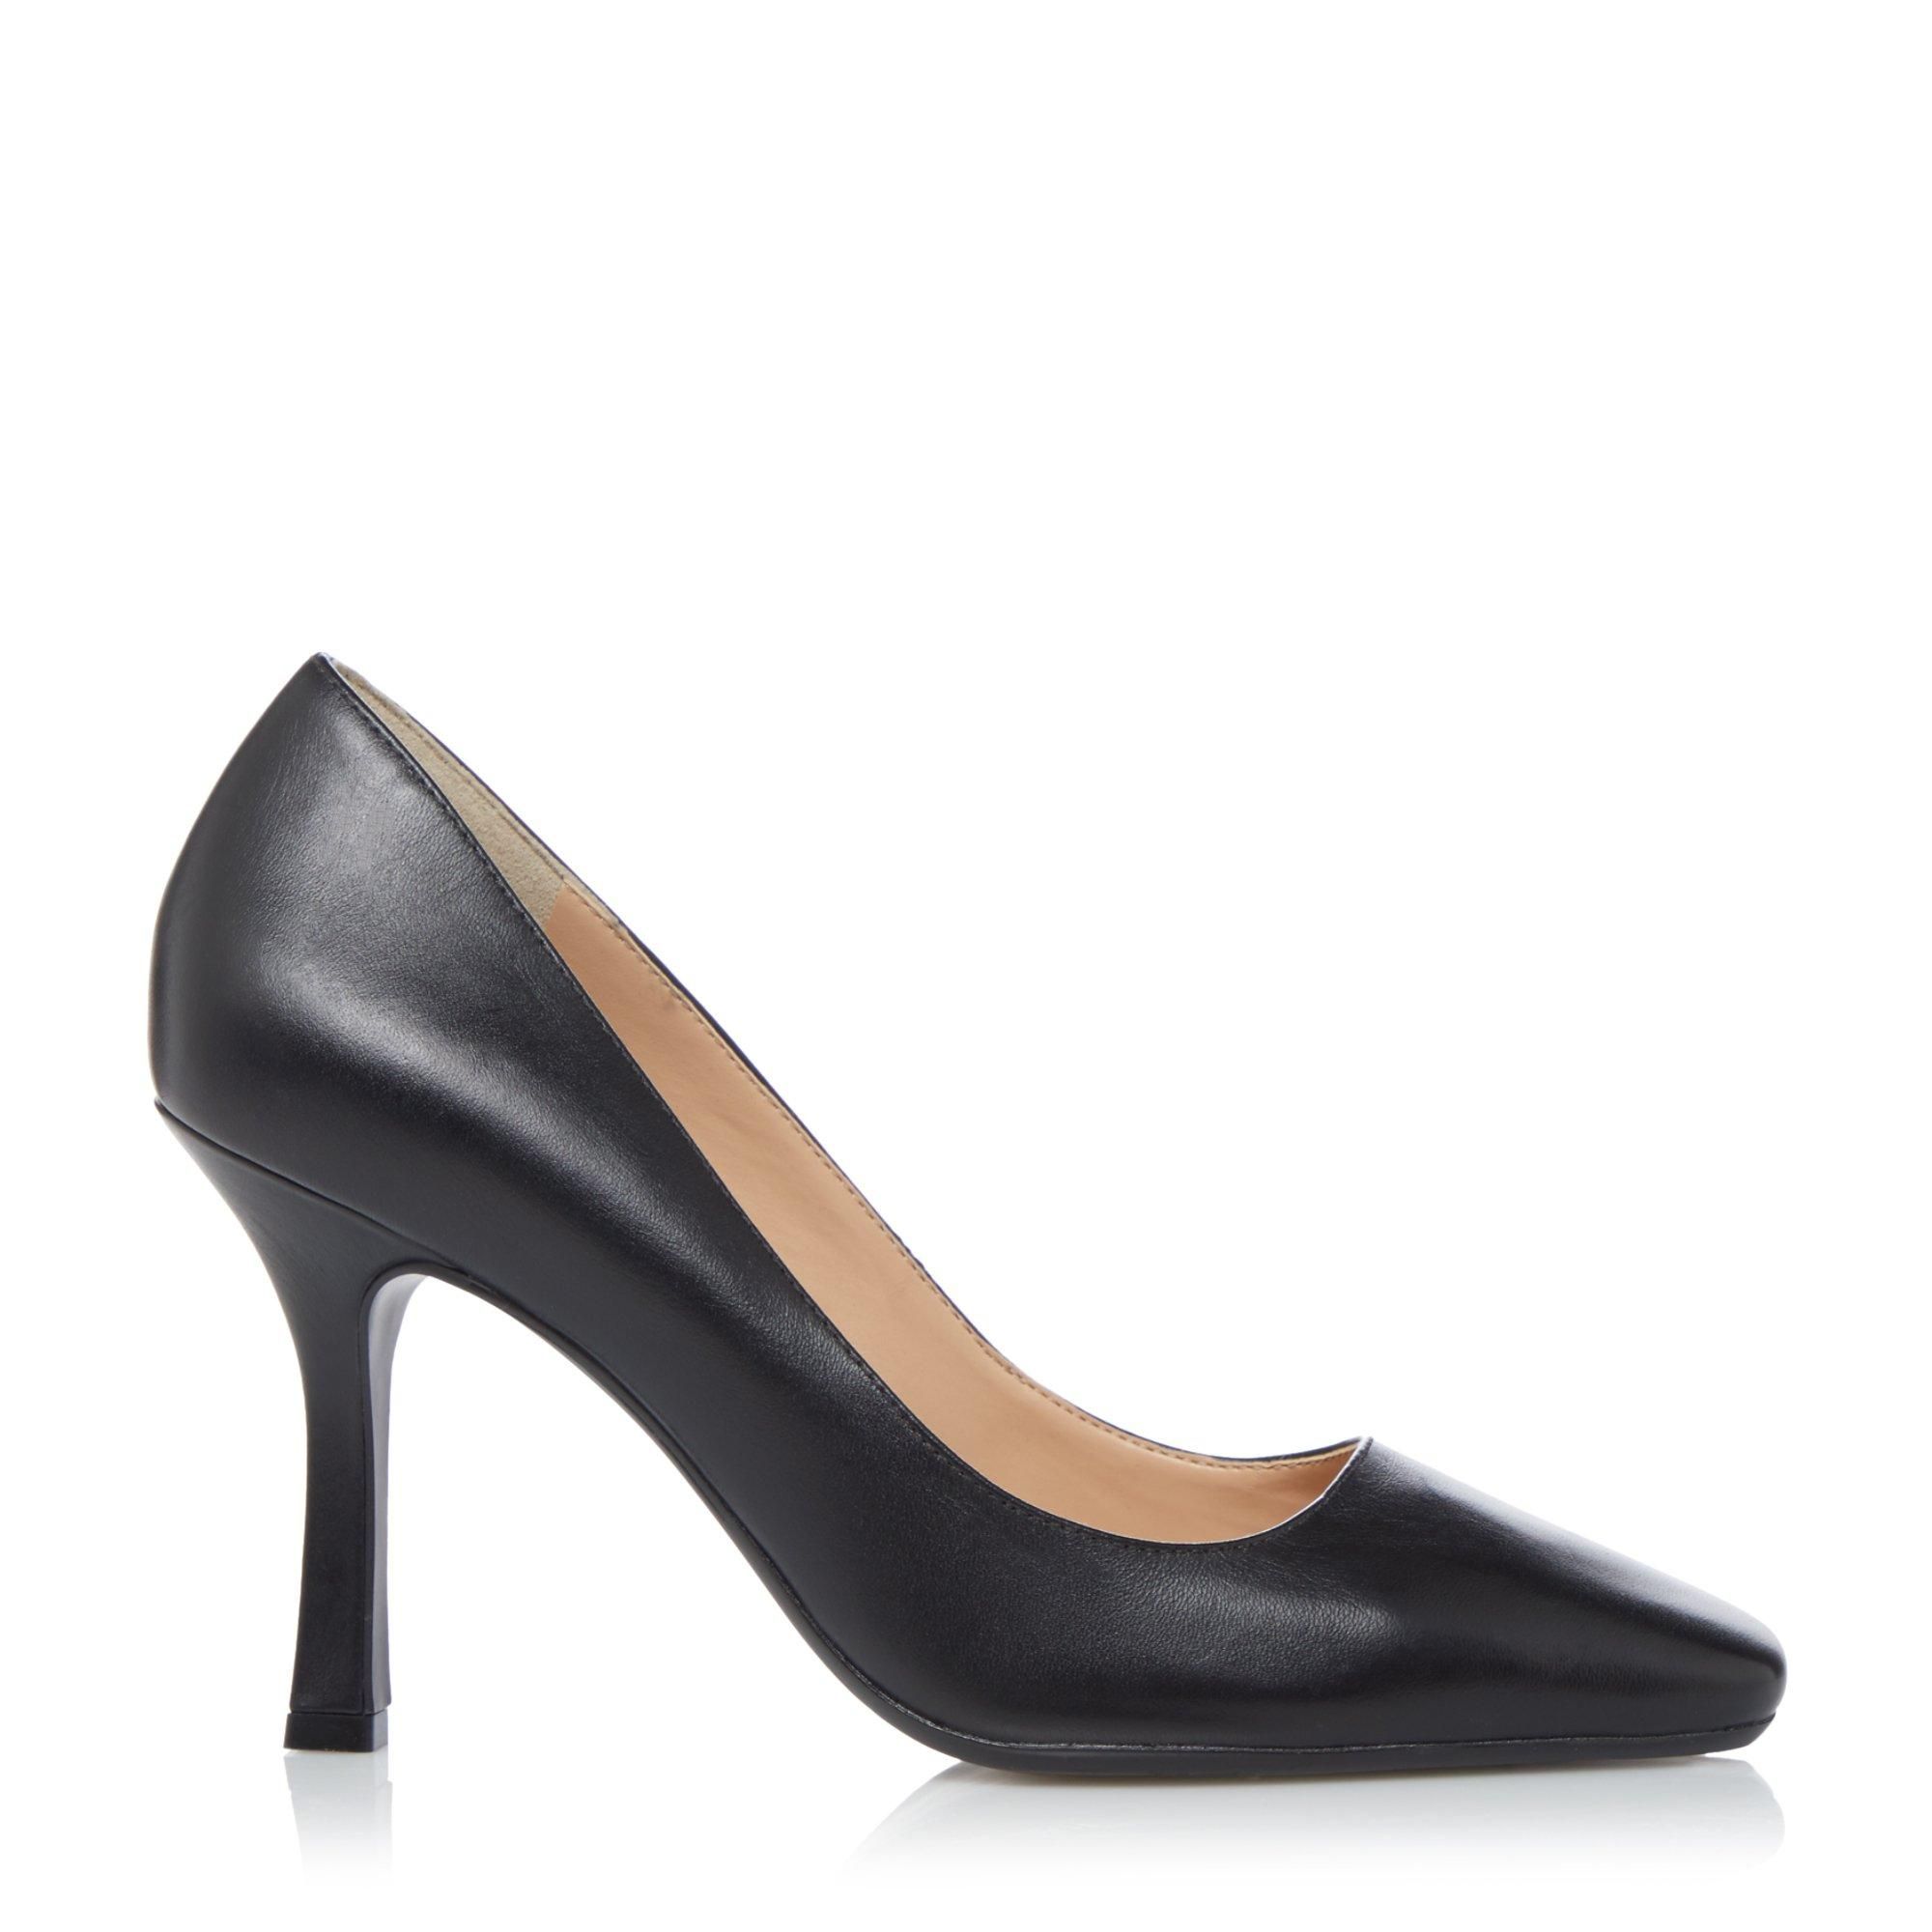 Meet Dune London's classic court with a twist. They're presented with a slender mid-heel stiletto and a square toe. Complete with a polished finish for a simple sharp, look.